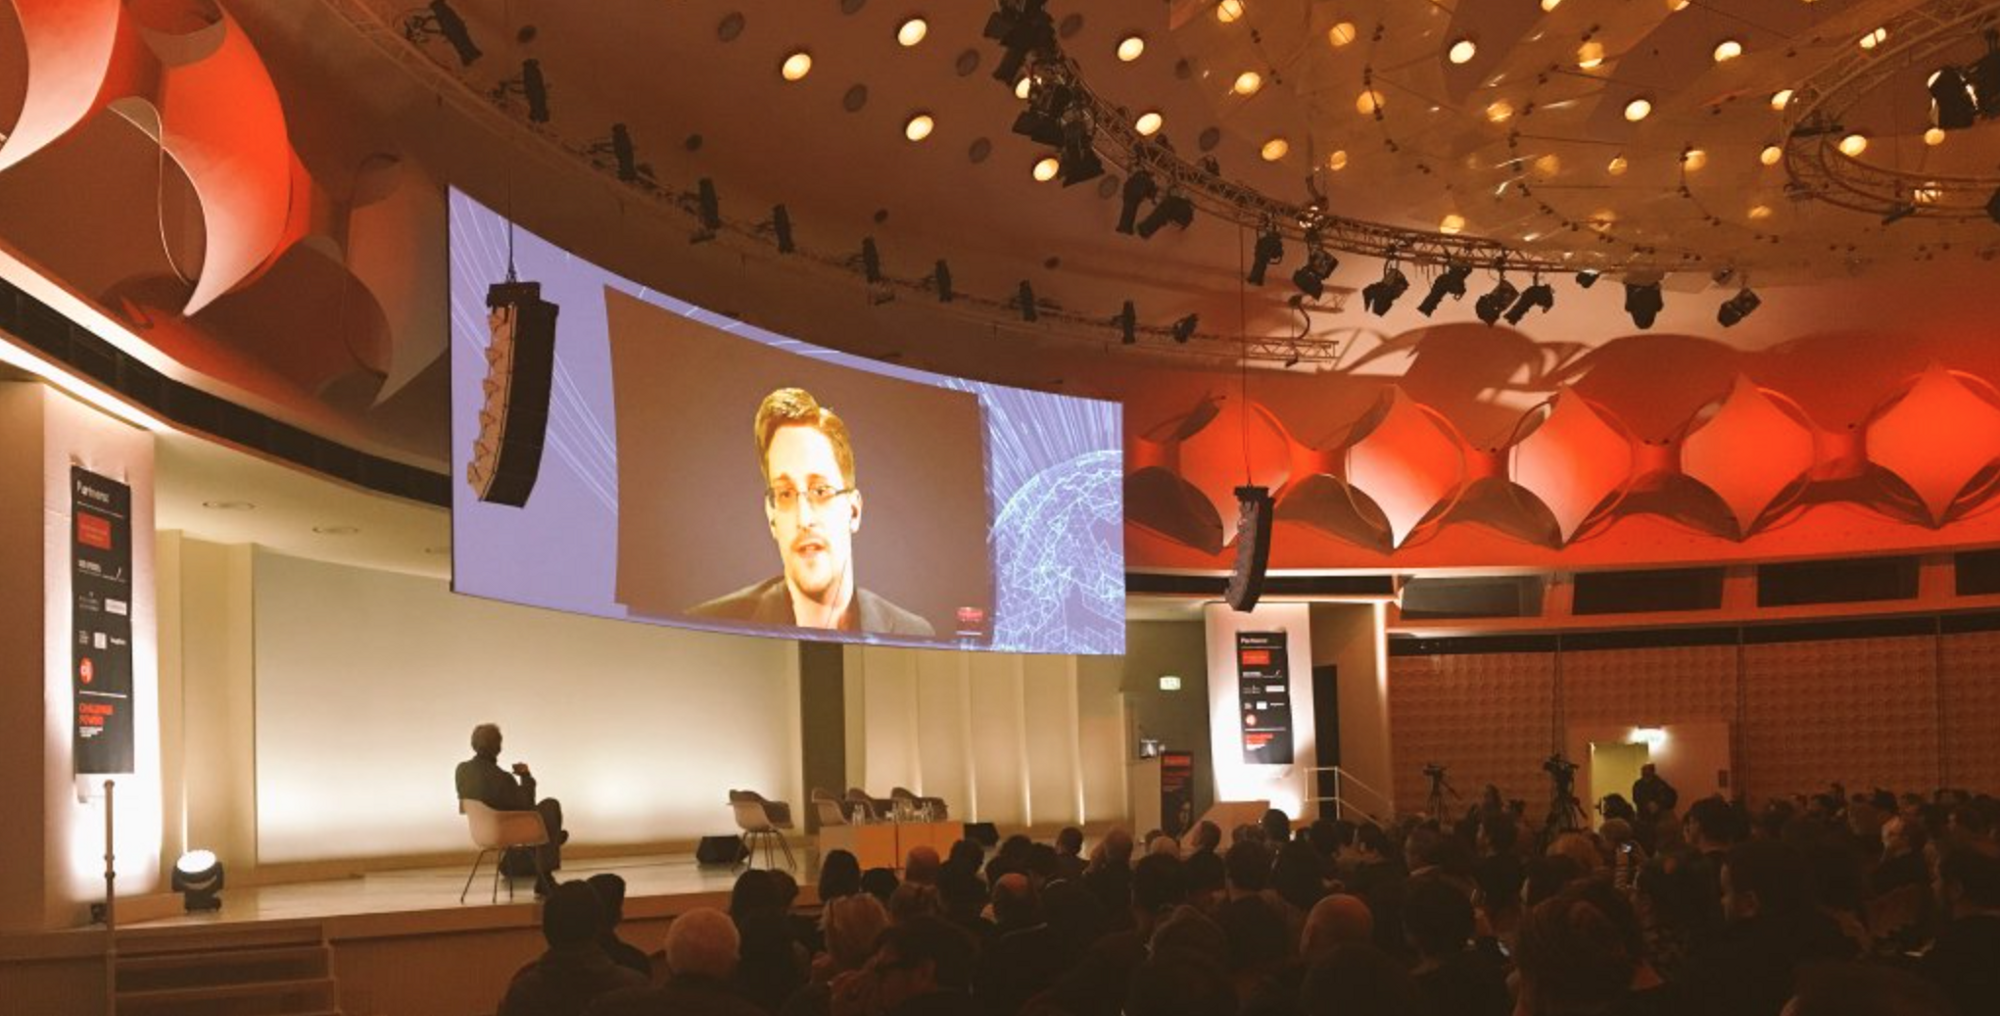 Edward Snowden addressing an audience live in Berlin via video link on Saturday evening.